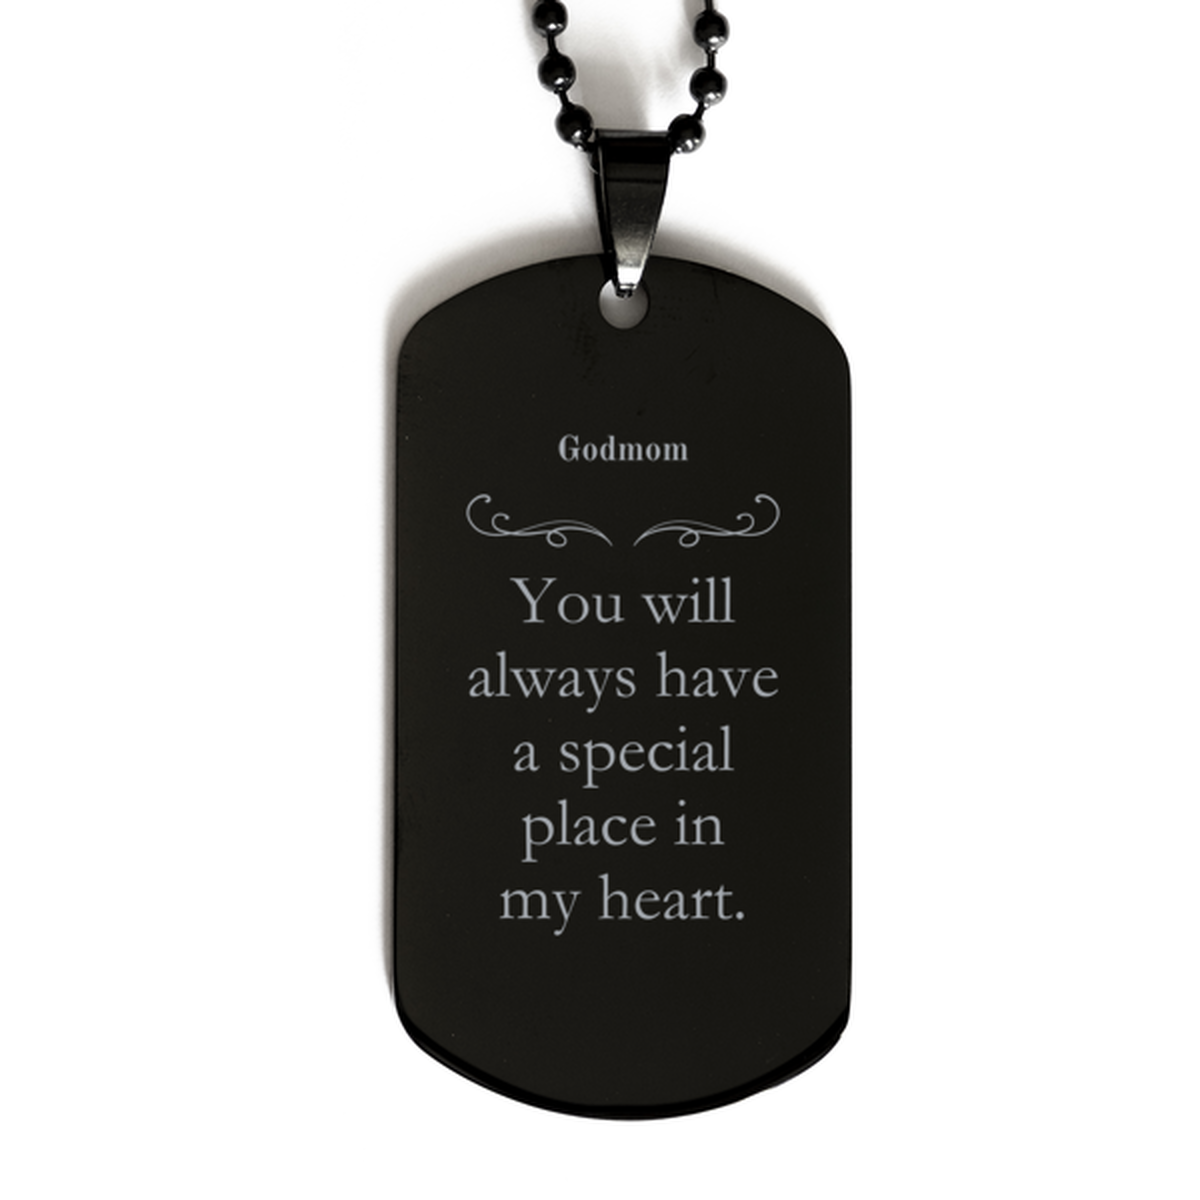 Black Dog Tag Godmom Special Place in My Heart Engraved Pendant Necklace for Birthday Christmas Graduation Veterans Day Gift for Godmom